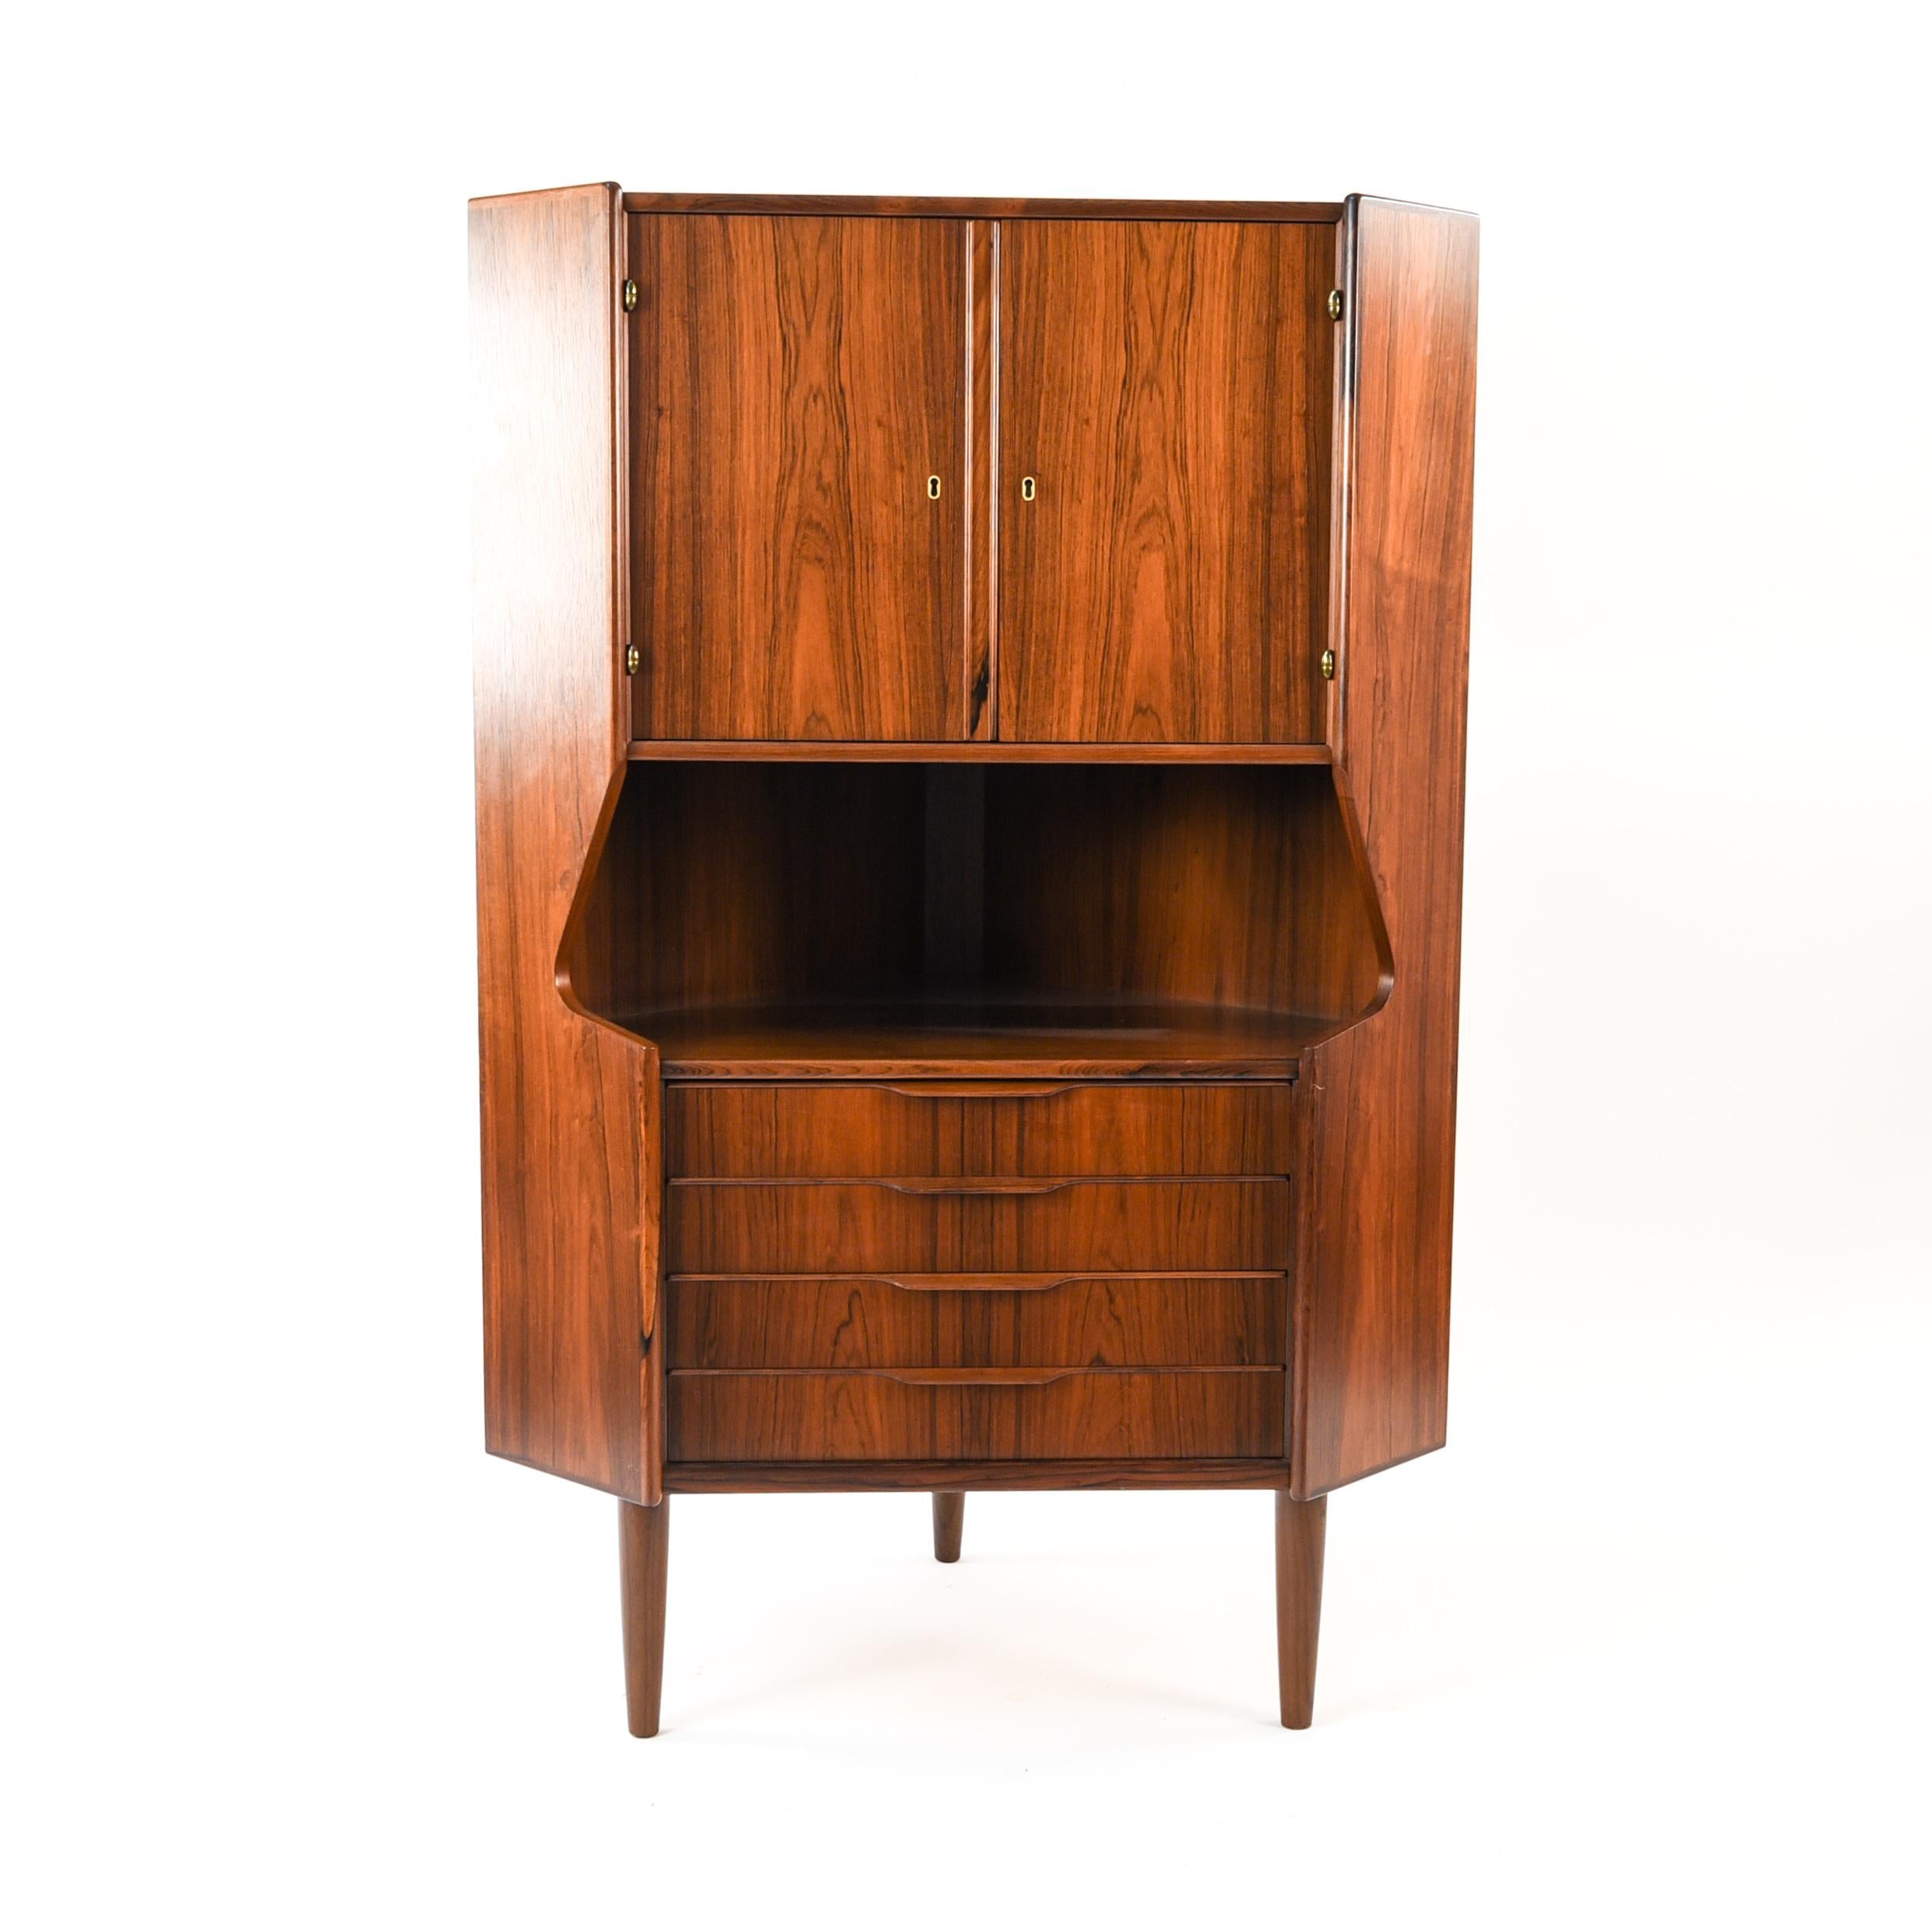 This Danish midcentury rosewood corner cabinet is full of storage with a two door cabinet on top and four drawers below. This cabinet features great modern design which is exemplified in the angularity of the sides.